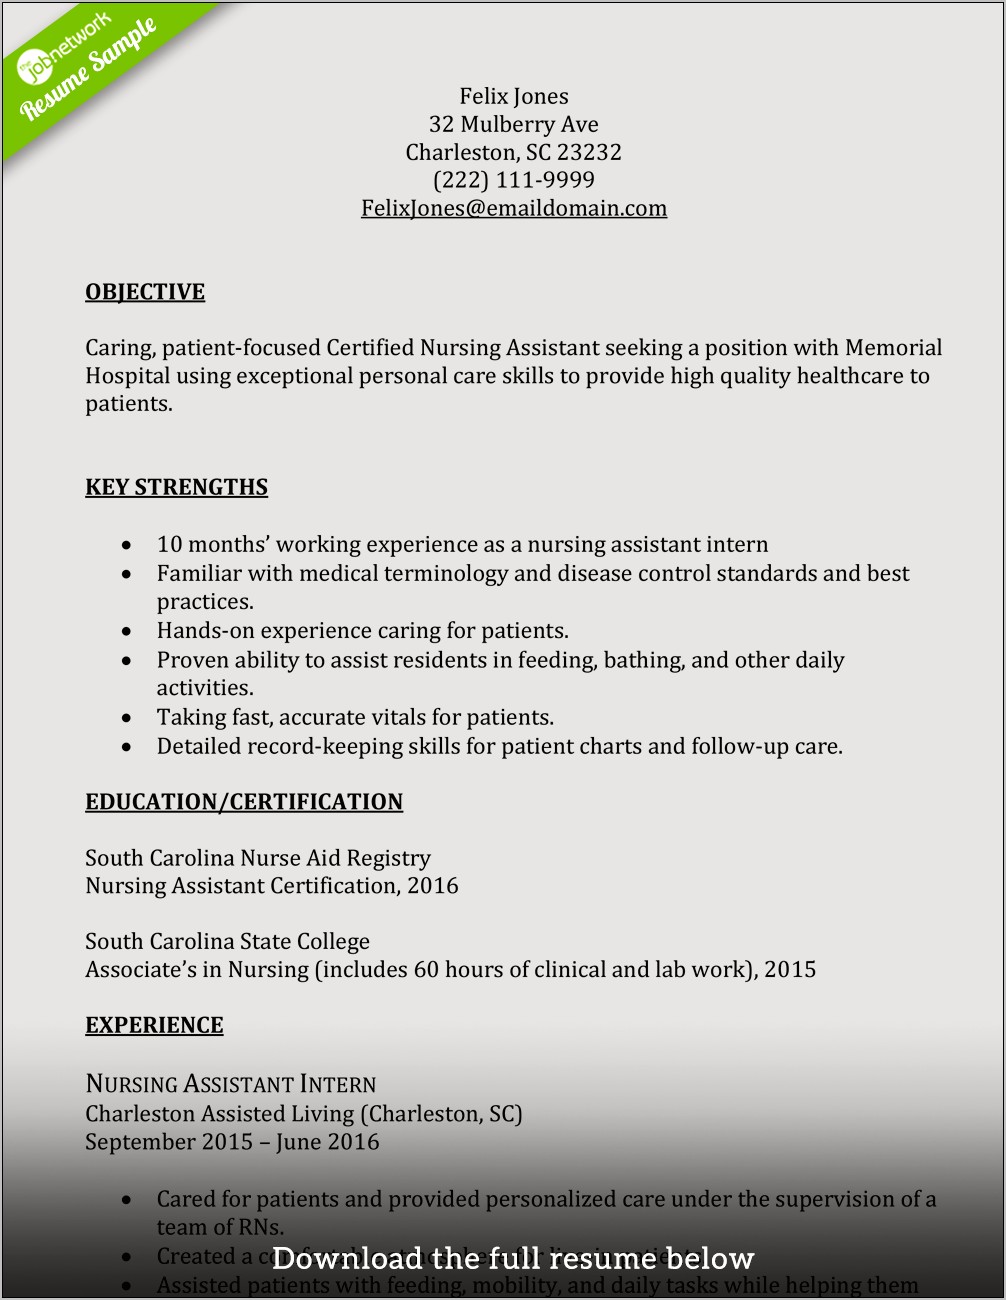 Nursing Assistant Skills And Abilities On Resume